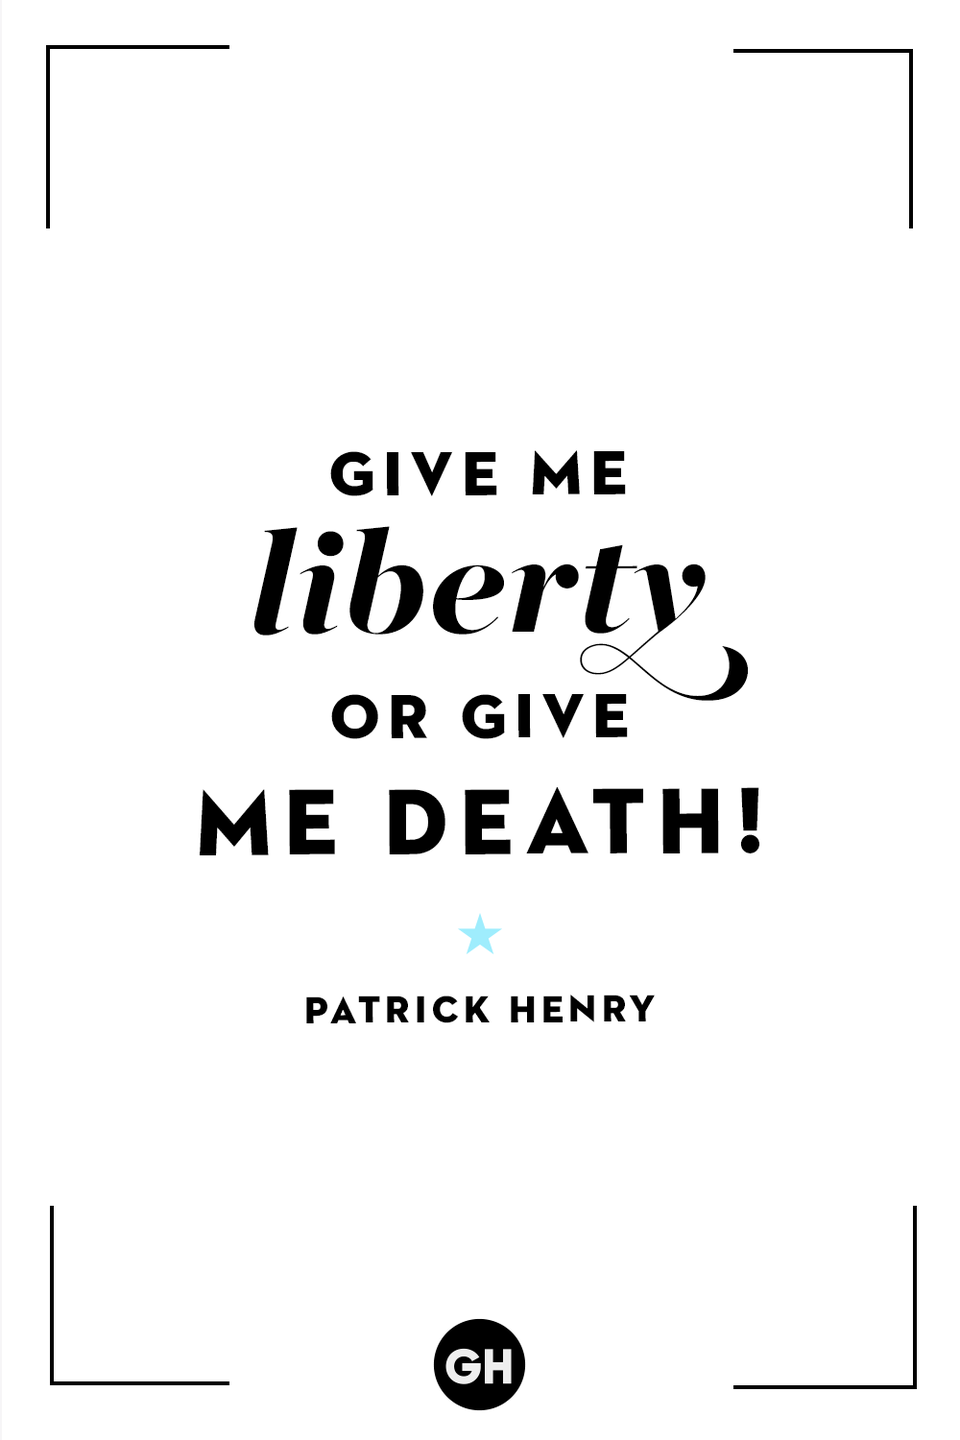 <p>Give me liberty or give me death!</p>